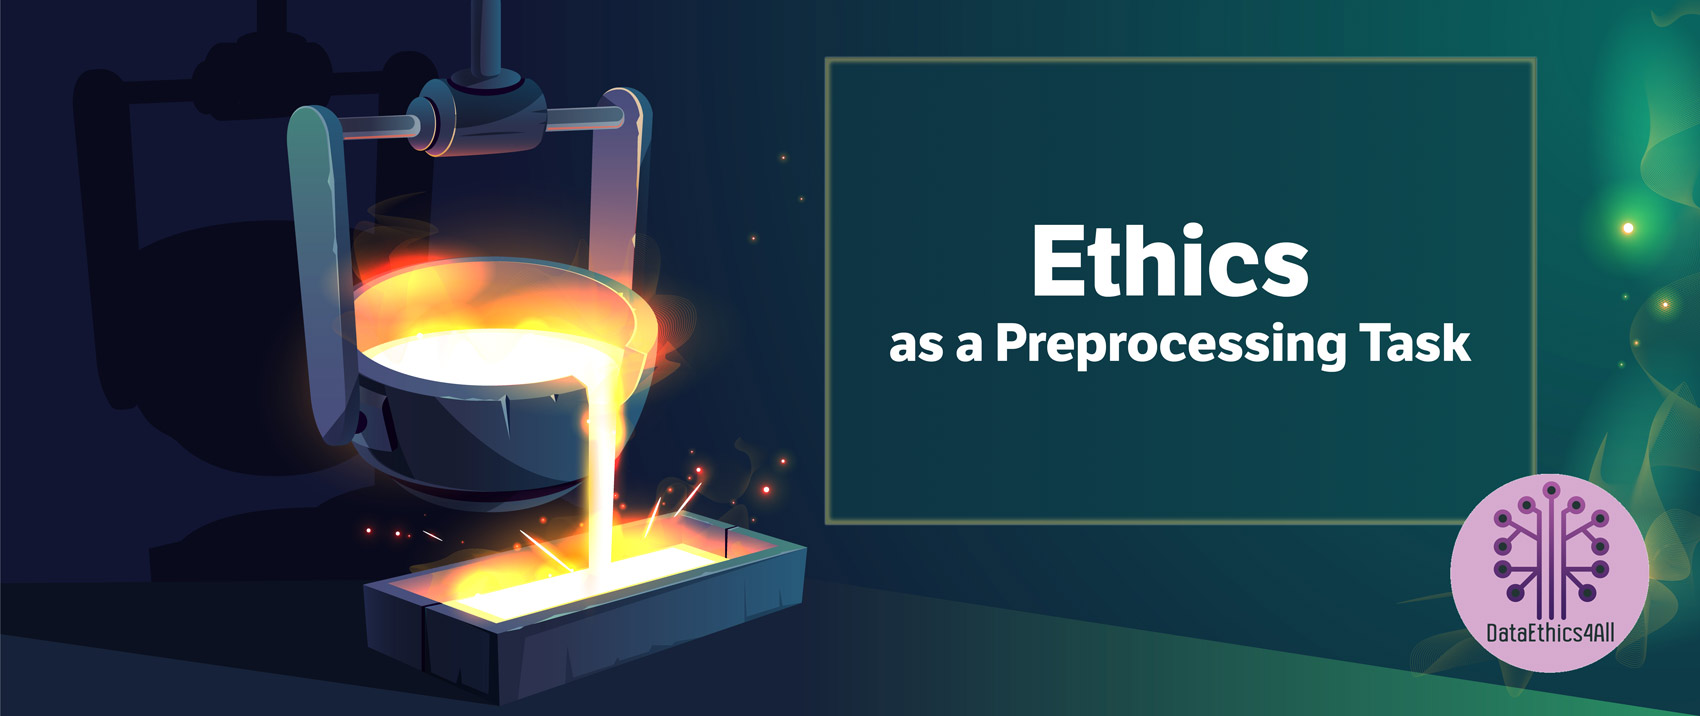 Ethics-as-a-Preprocessing-Task-DataEthics4All-AI-DIET-Magazine